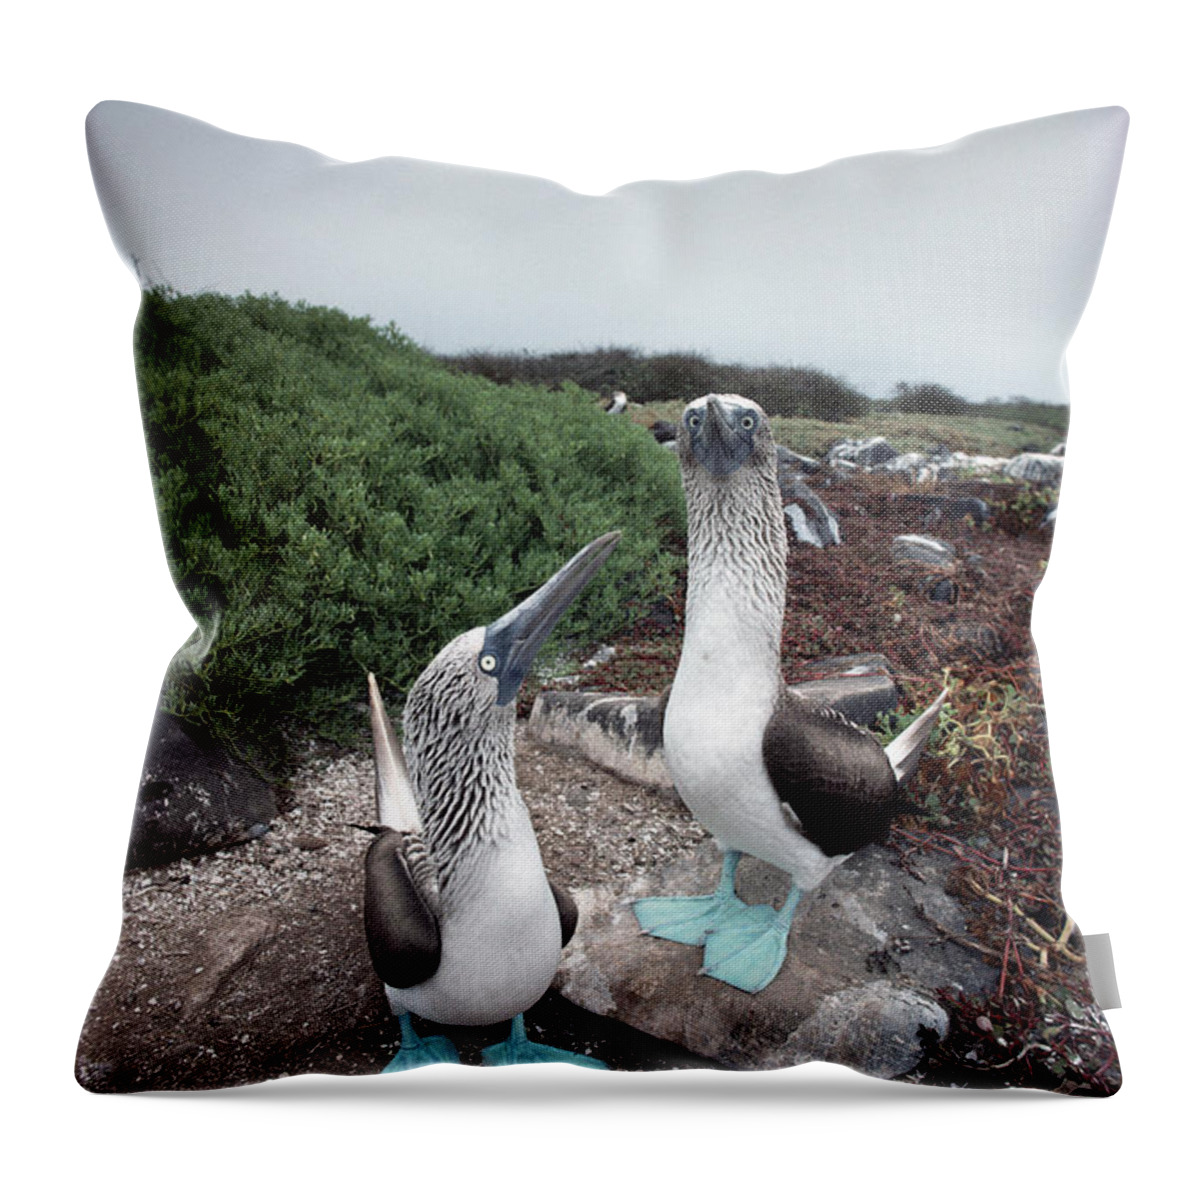 Feb0514 Throw Pillow featuring the photograph Blue-footed Booby Pair Courting by Tui De Roy